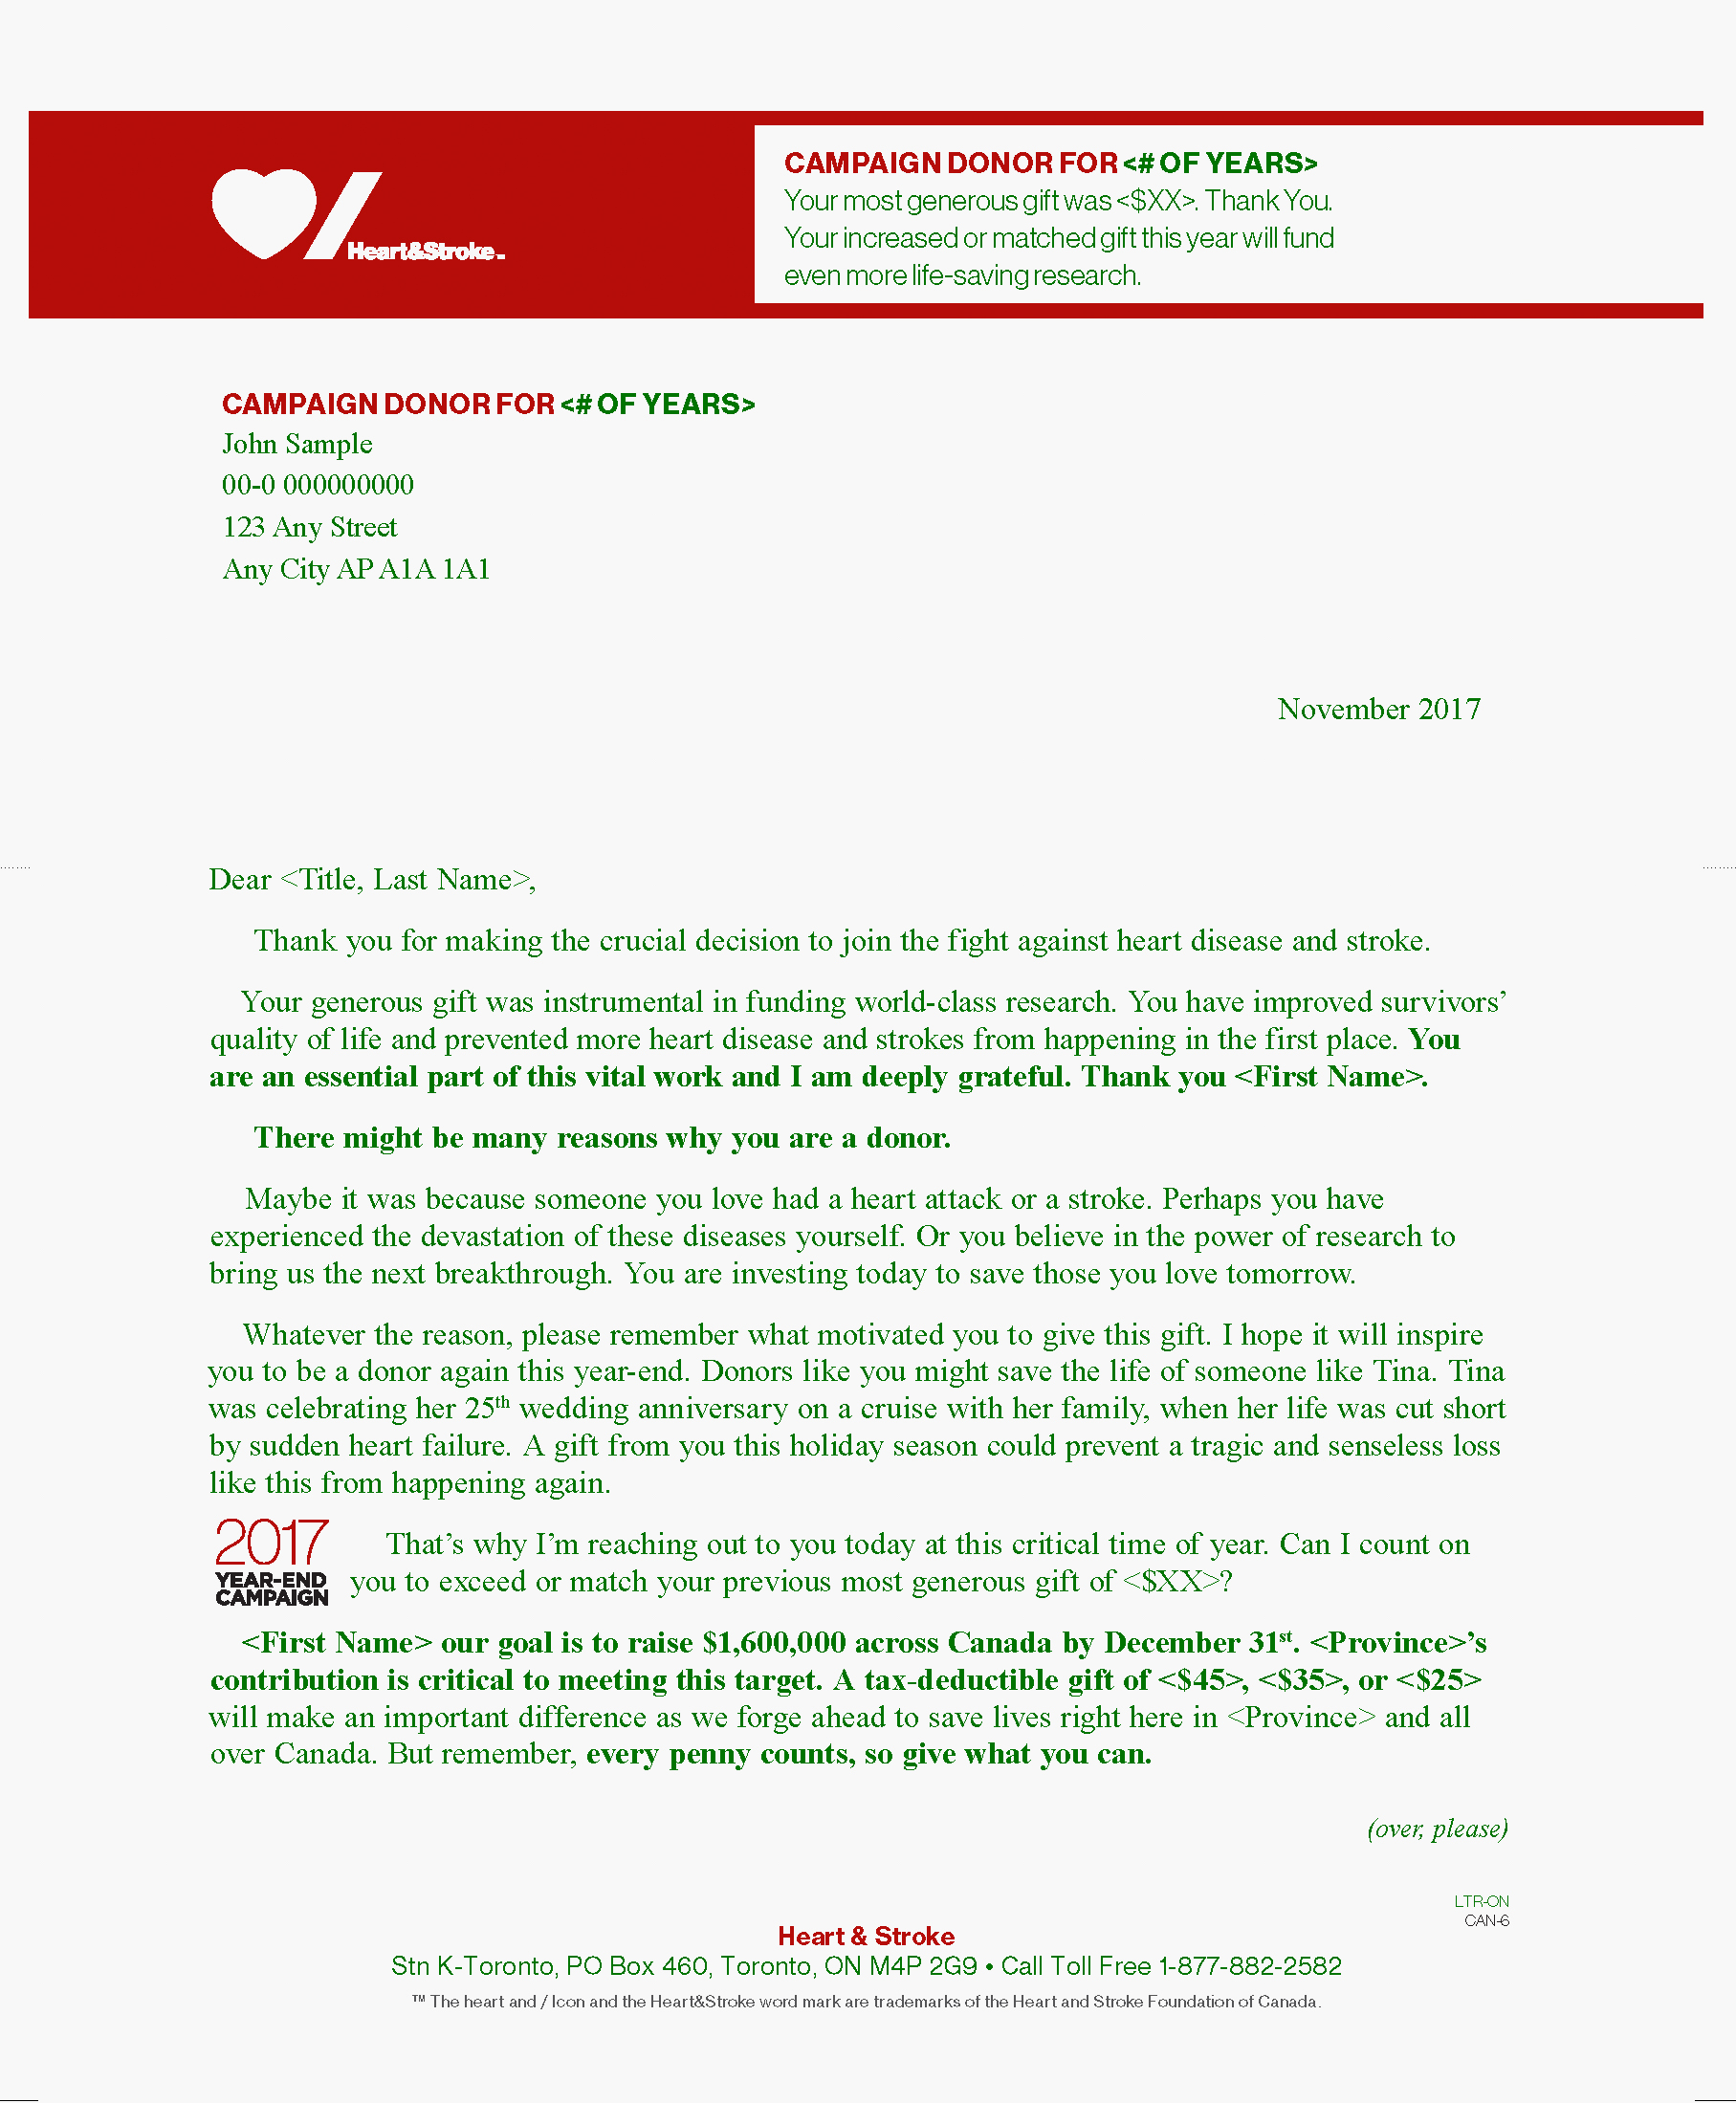 Identity + # of years letter (page 1)